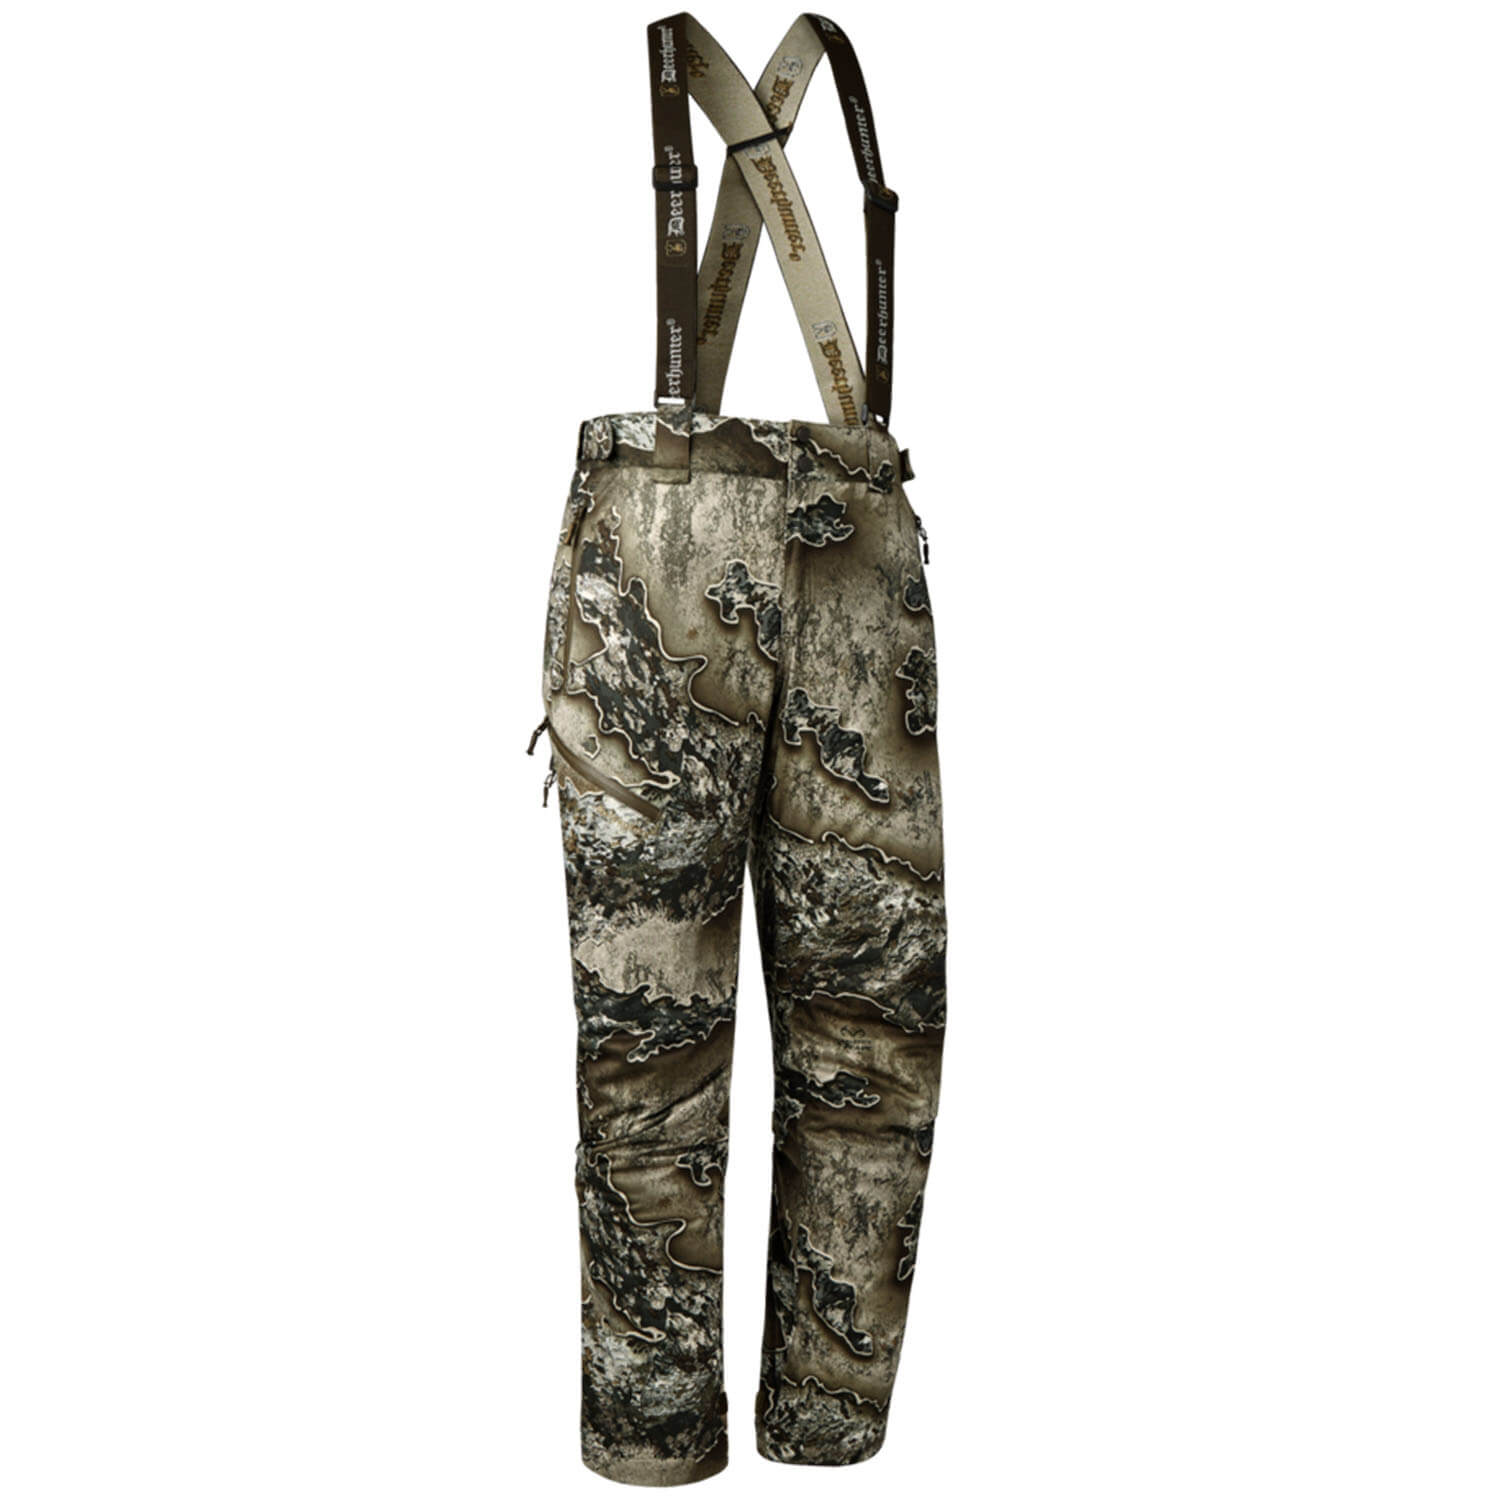 Deerhunter winter trousers Excape (realtree excape)